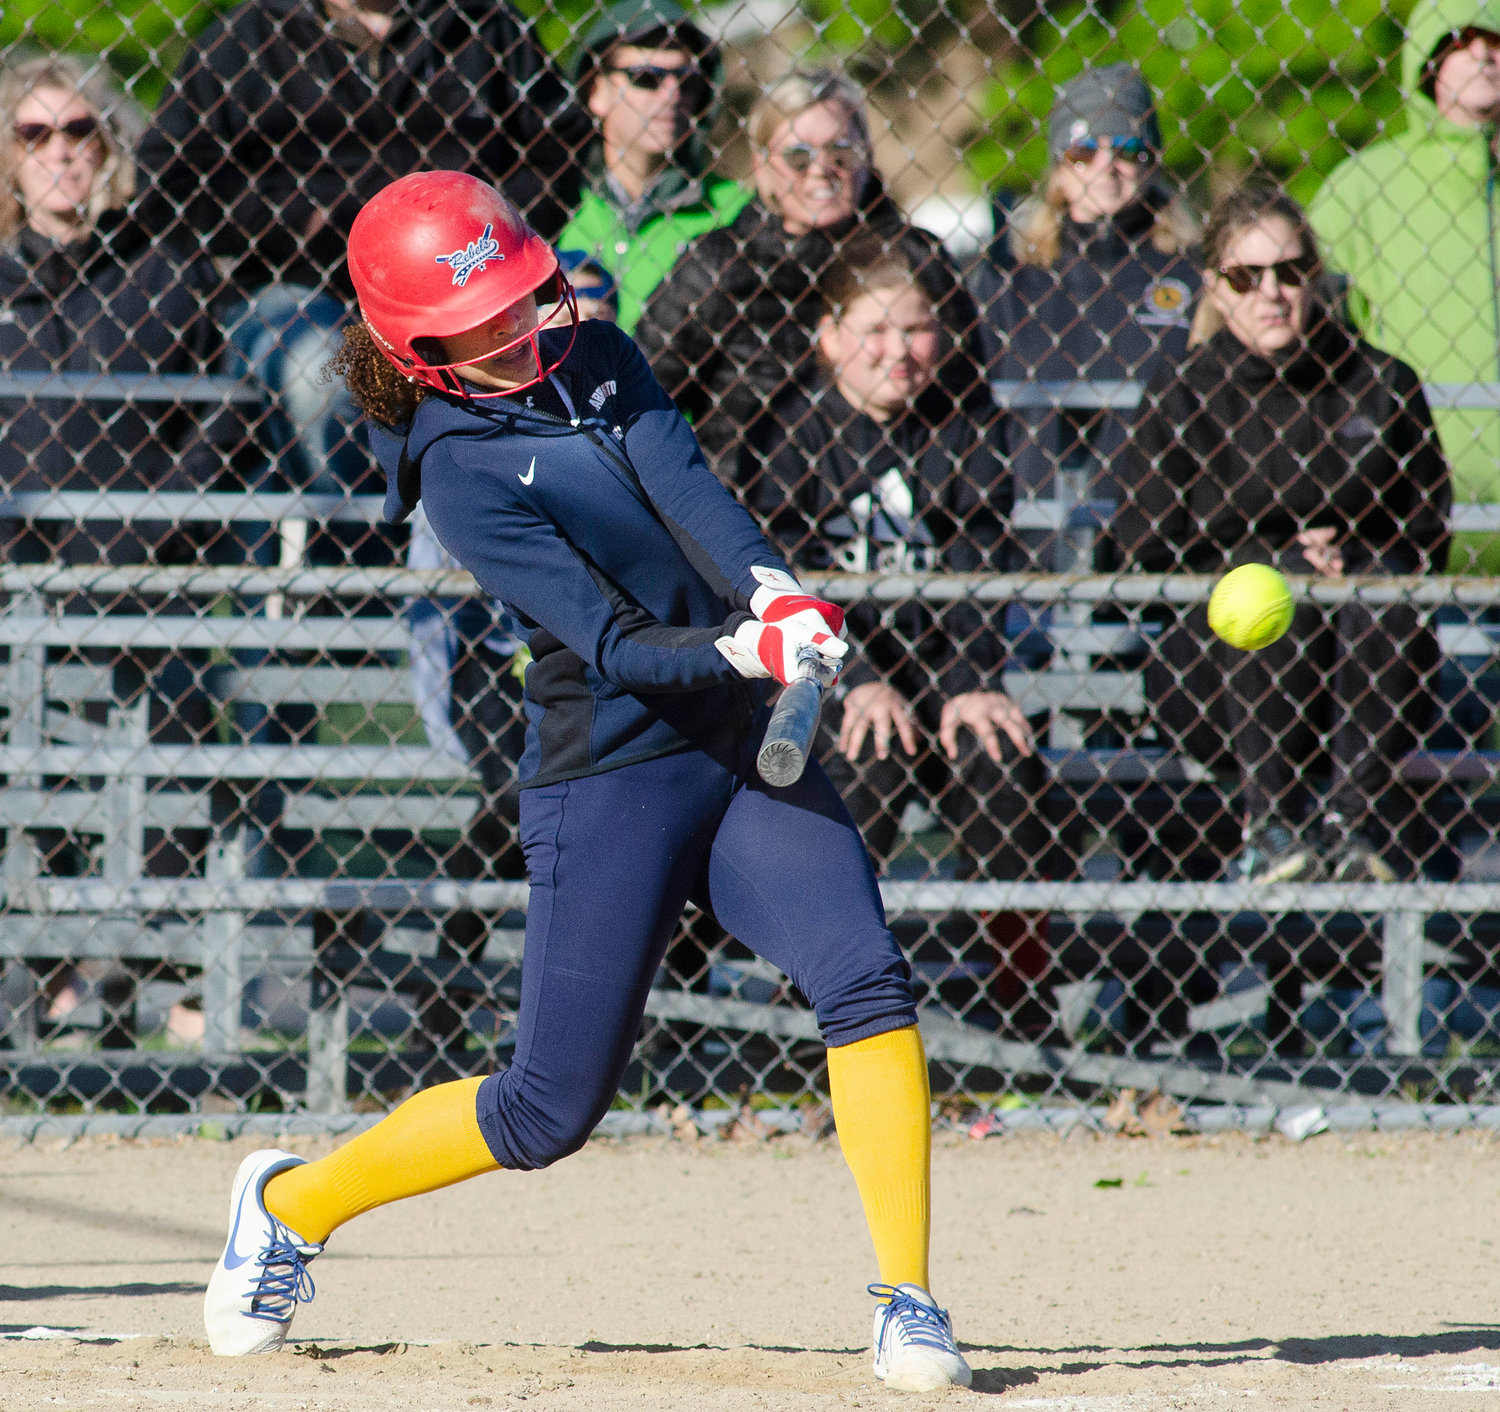 Barrington first baseman Isys Dunphy smacks a double to left field and drives in a pair of runs for the Eagles.